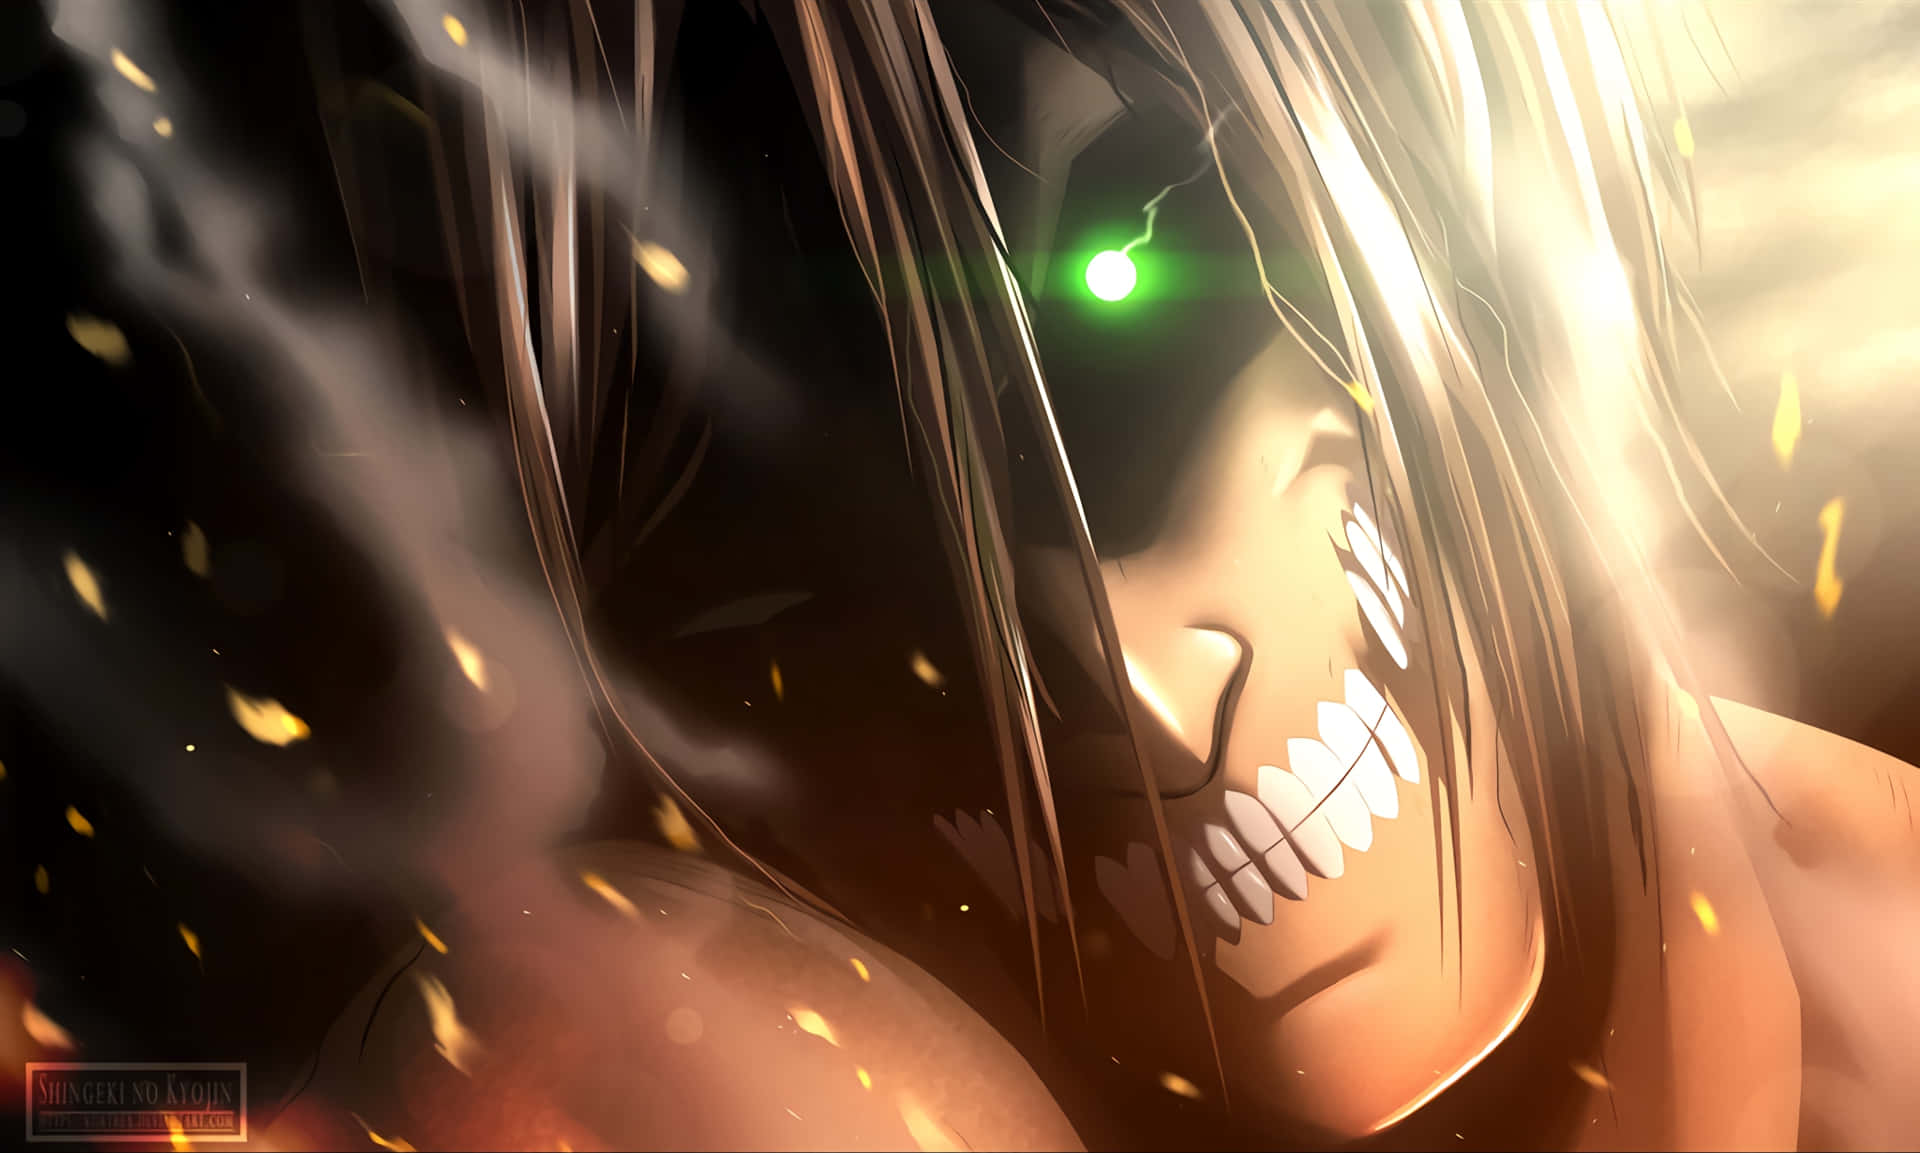 Titan Eren emerges from the shadows to fight for humanity Wallpaper